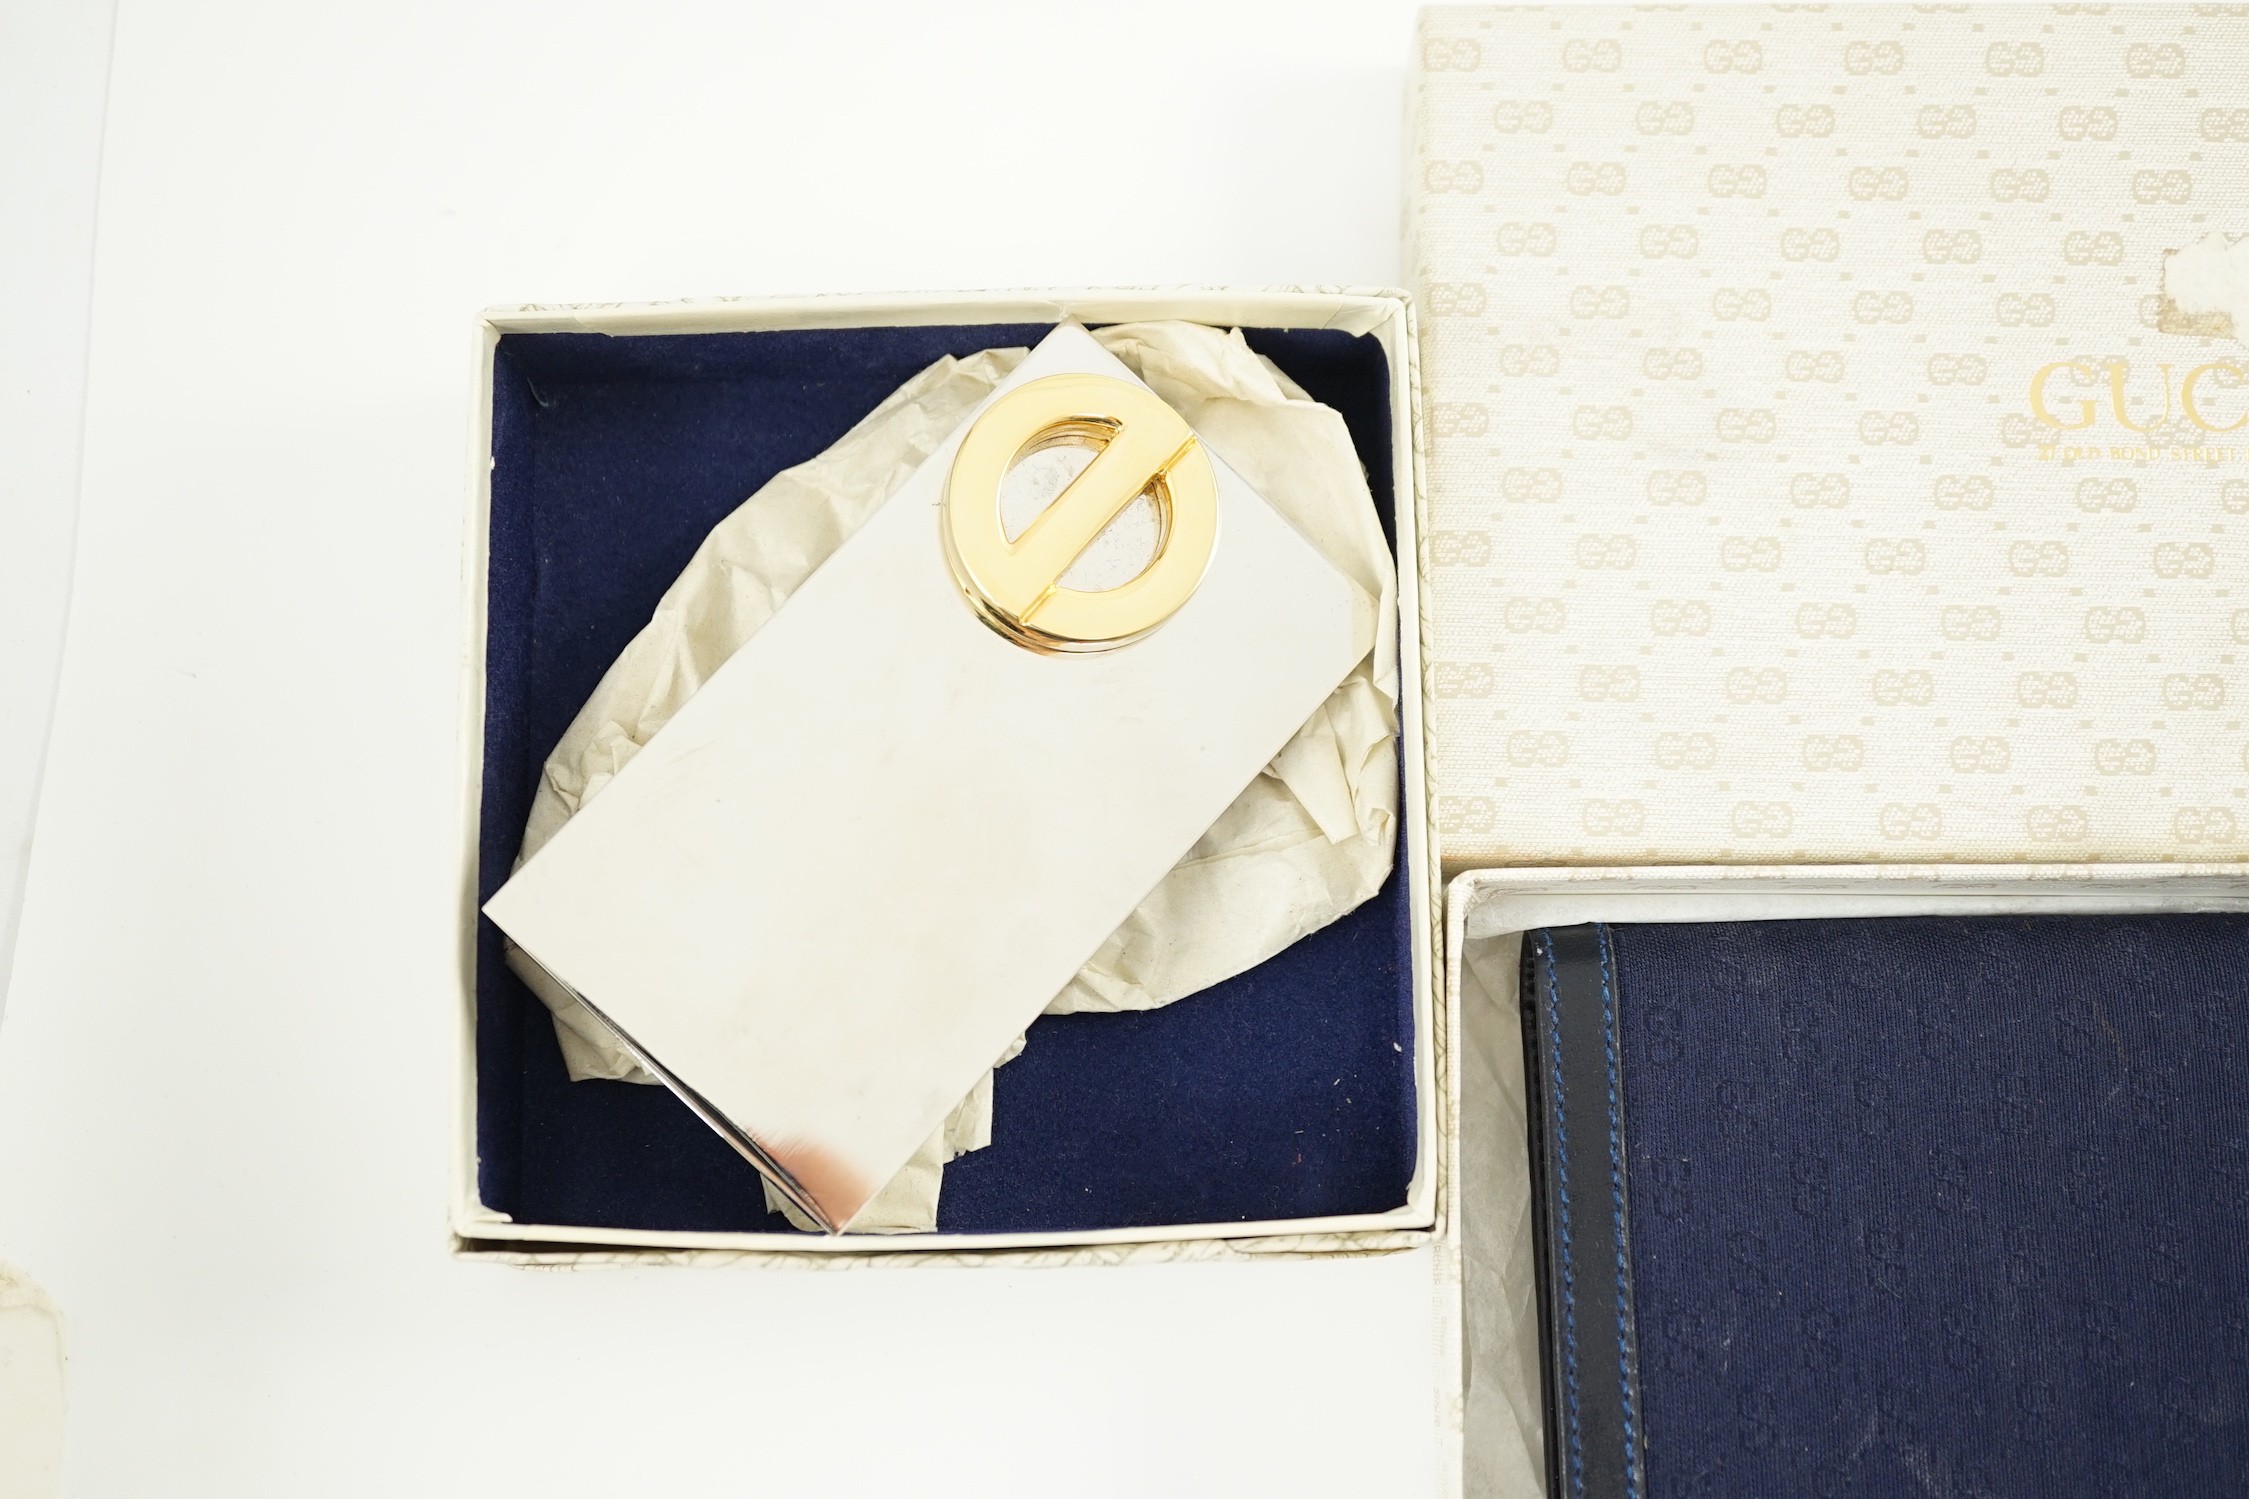 A Gucci blue leather address book, a Smythson leather travel wallet and a Christian Dior desk clip, all boxed.